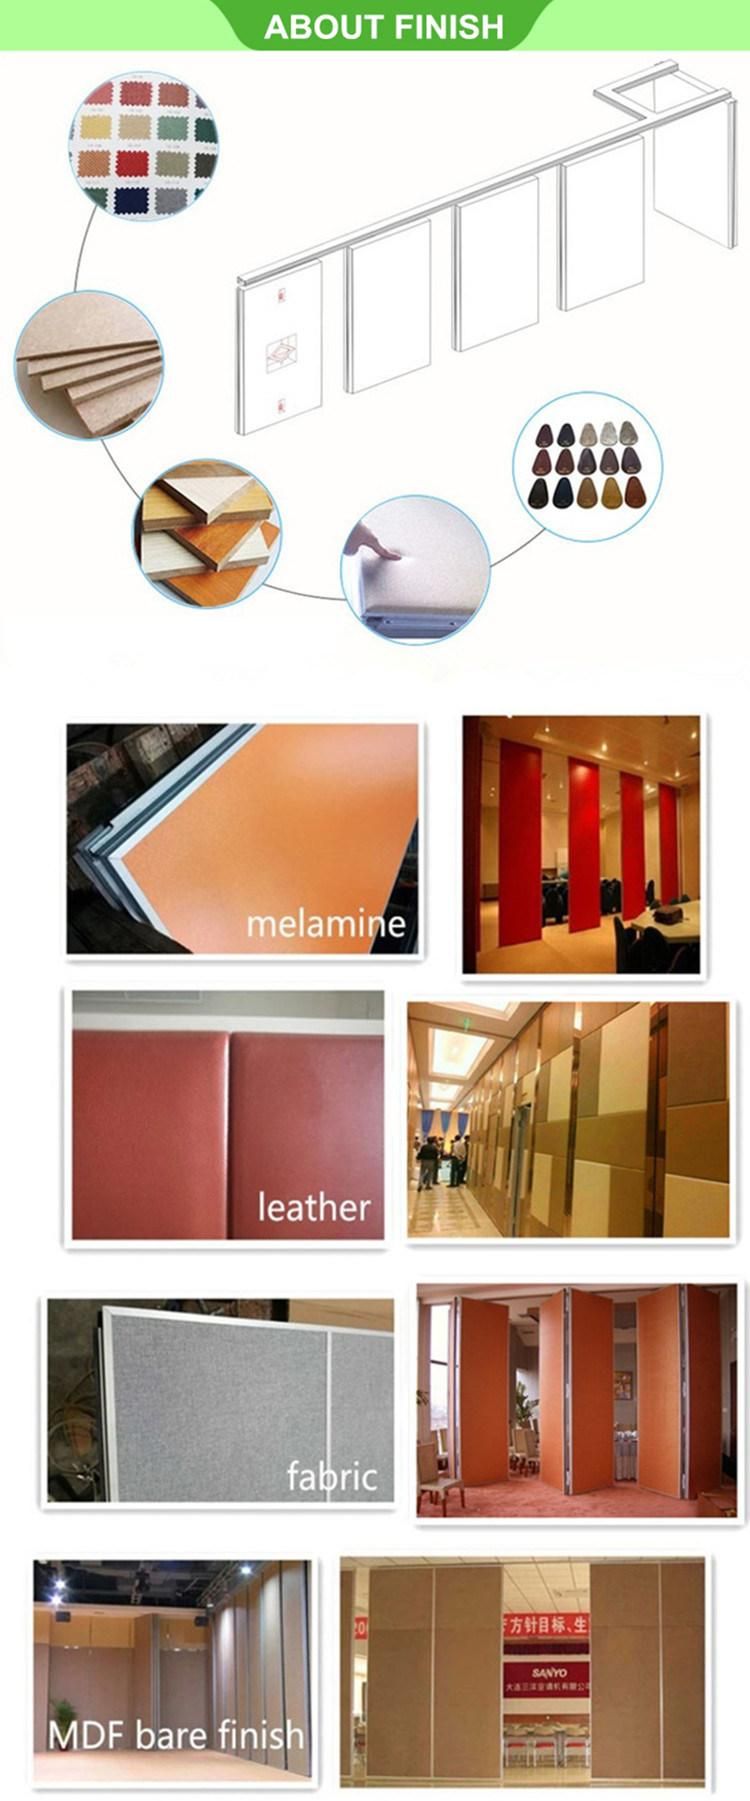 Soundproof Folding Partition and Sliding Walls Rooms Door for Hotel